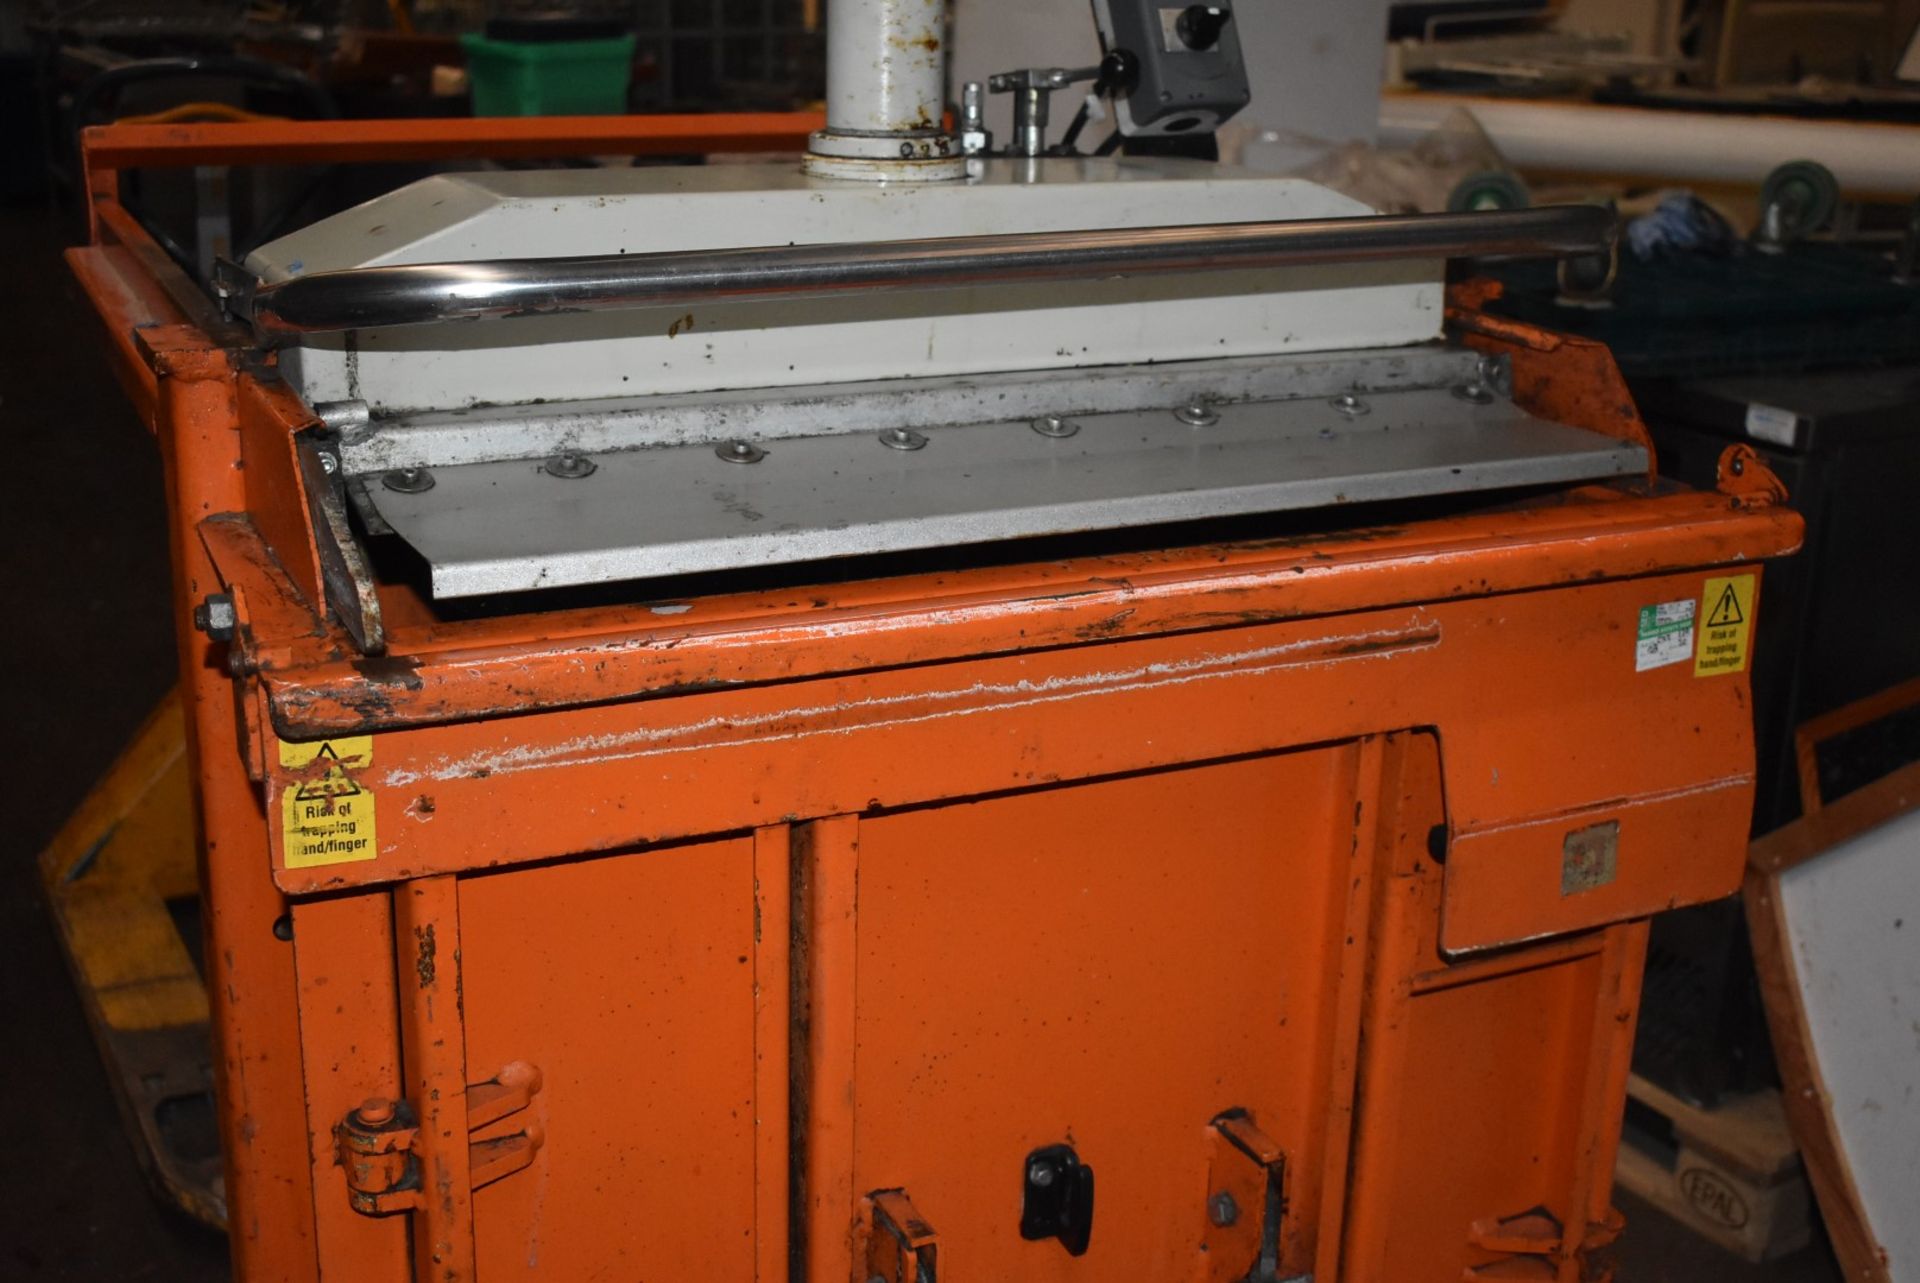 1 x Orwak 5010 Hydraulic Press Compact Cardboard Baler - Used For Compacting Recyclable or Non- - Image 5 of 15